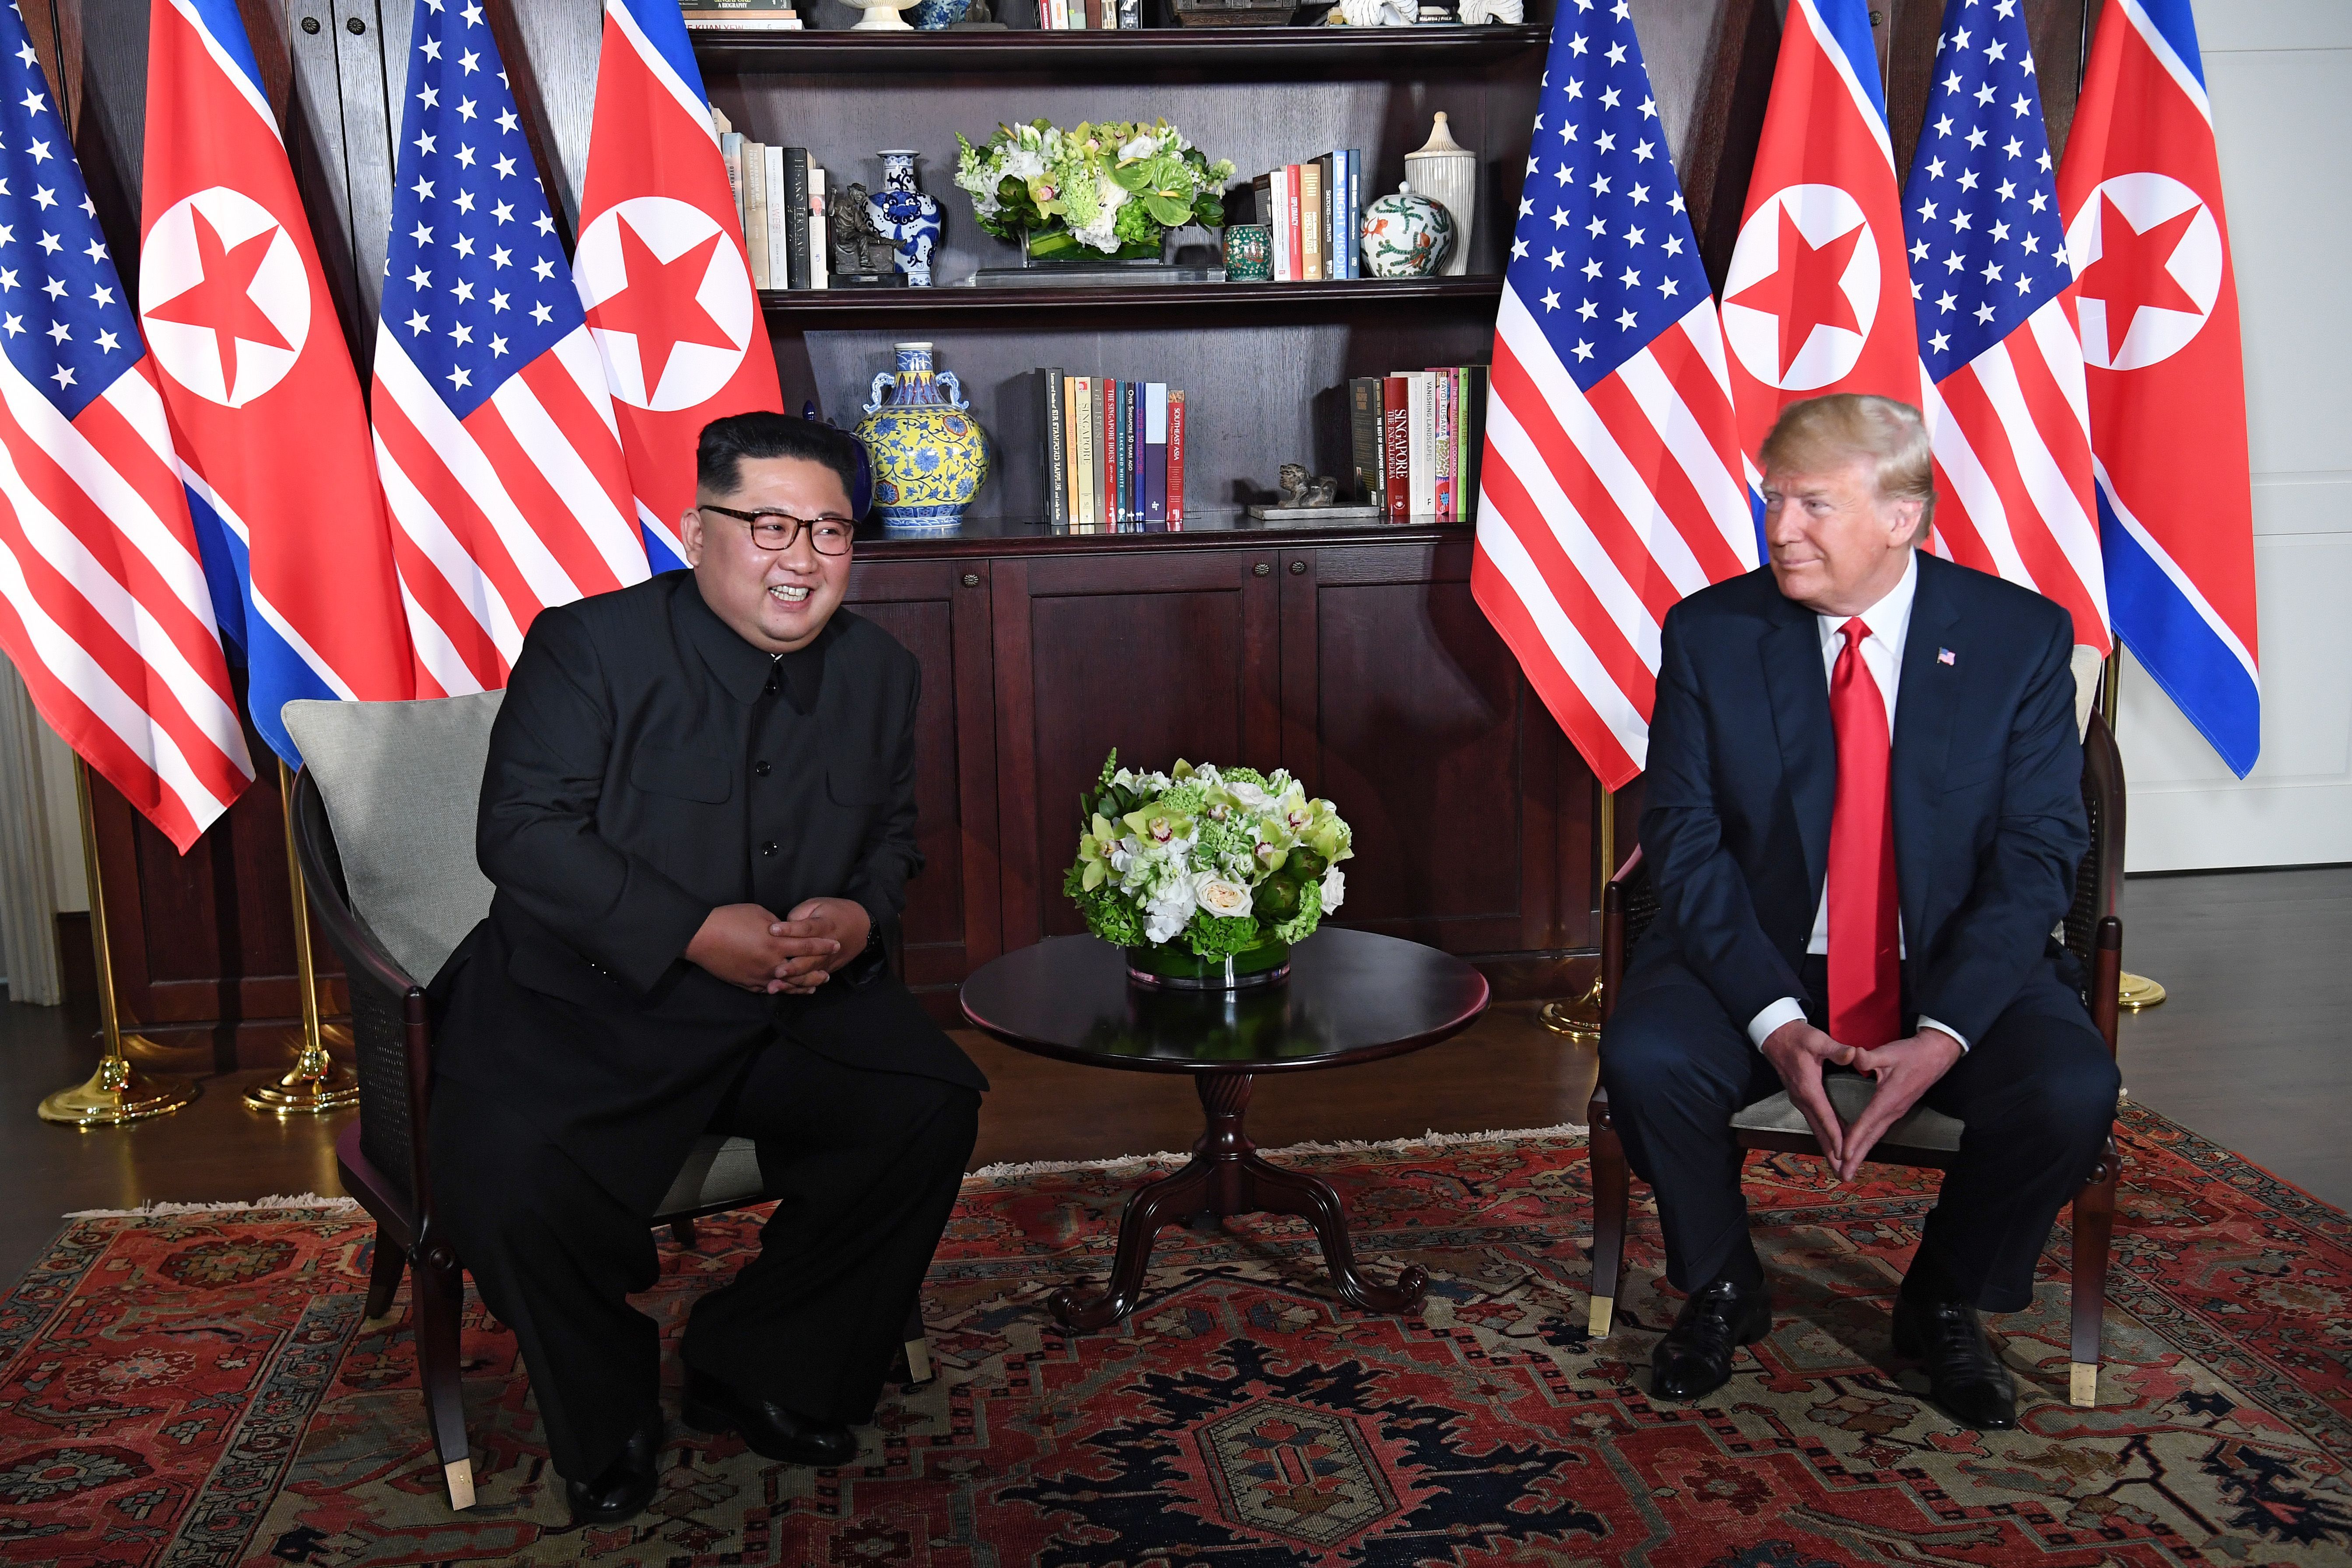 Trump and Kim smile across from each other ahead of their meeting